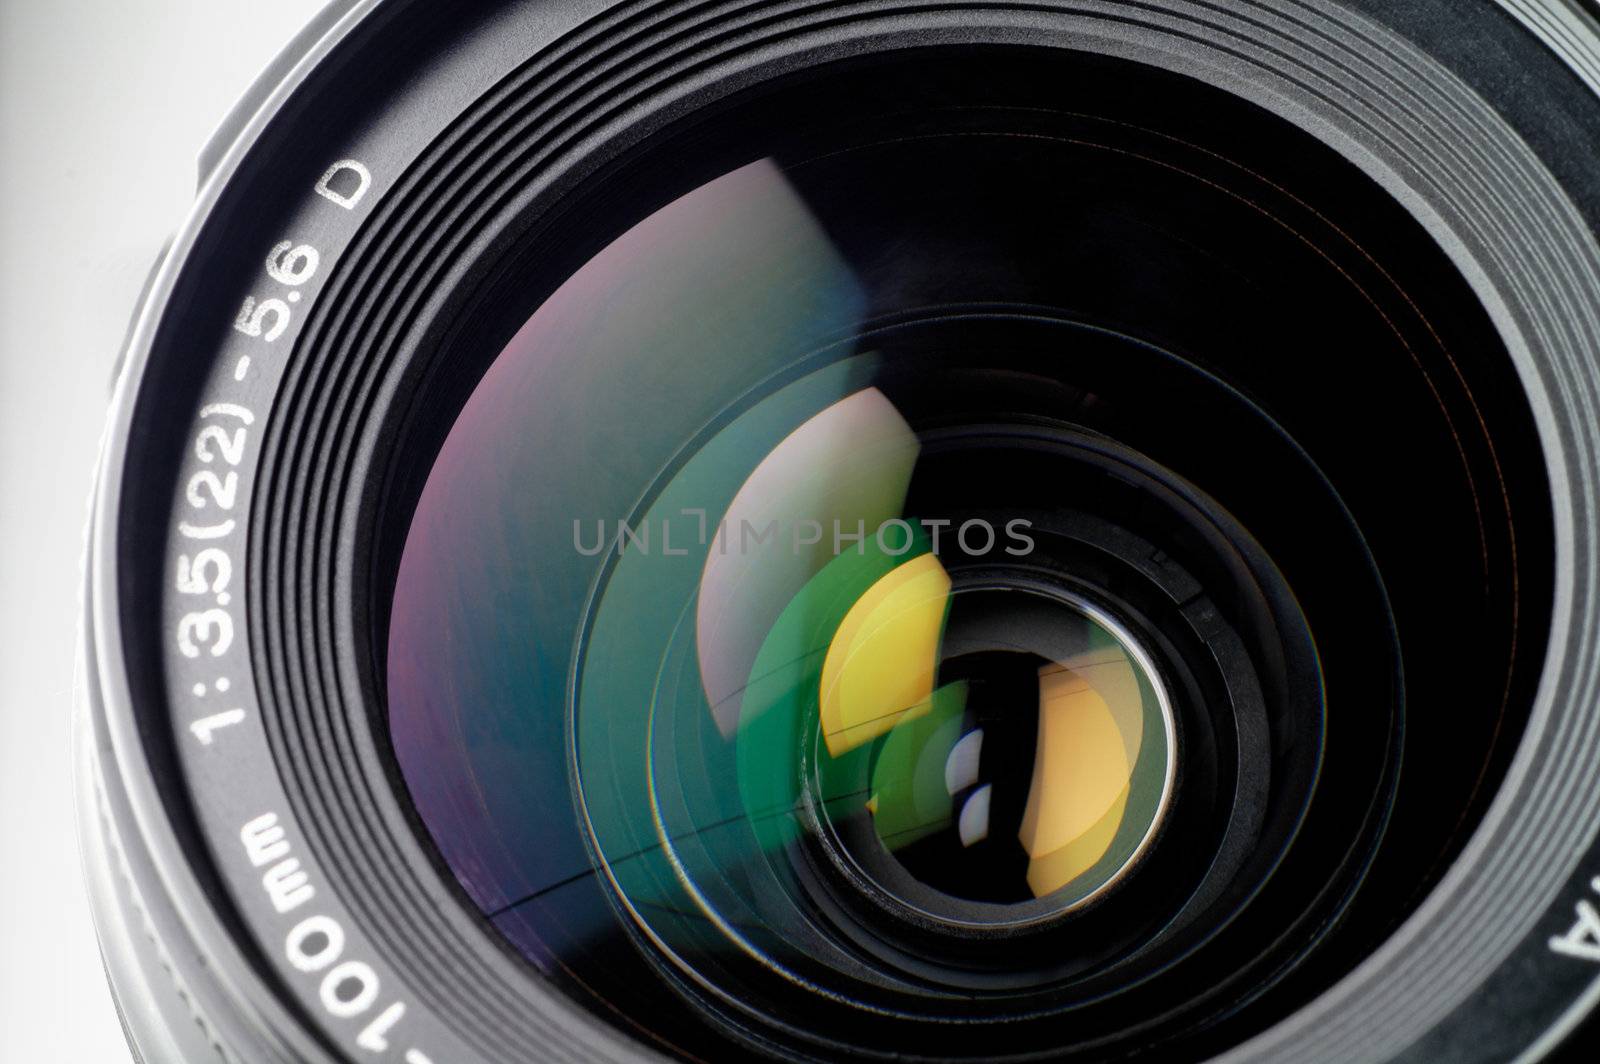 Camera lens closeup: this sample is from an SLR (single lens reflex).